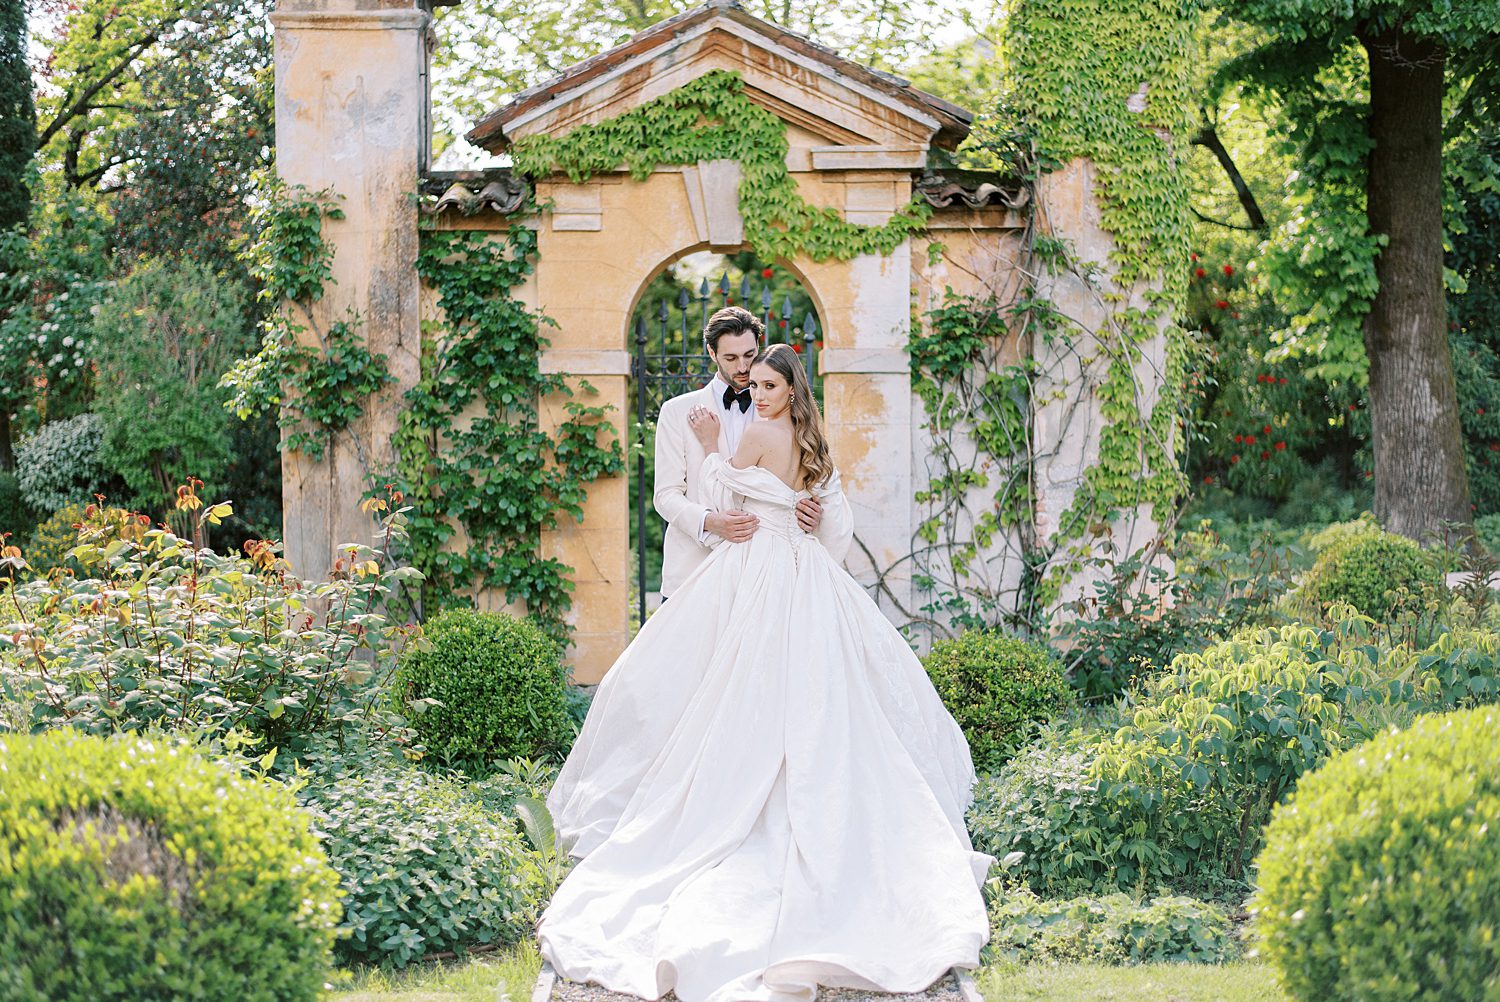 off-the-shoulder wedding gown with full skirt by Ines Di Santo